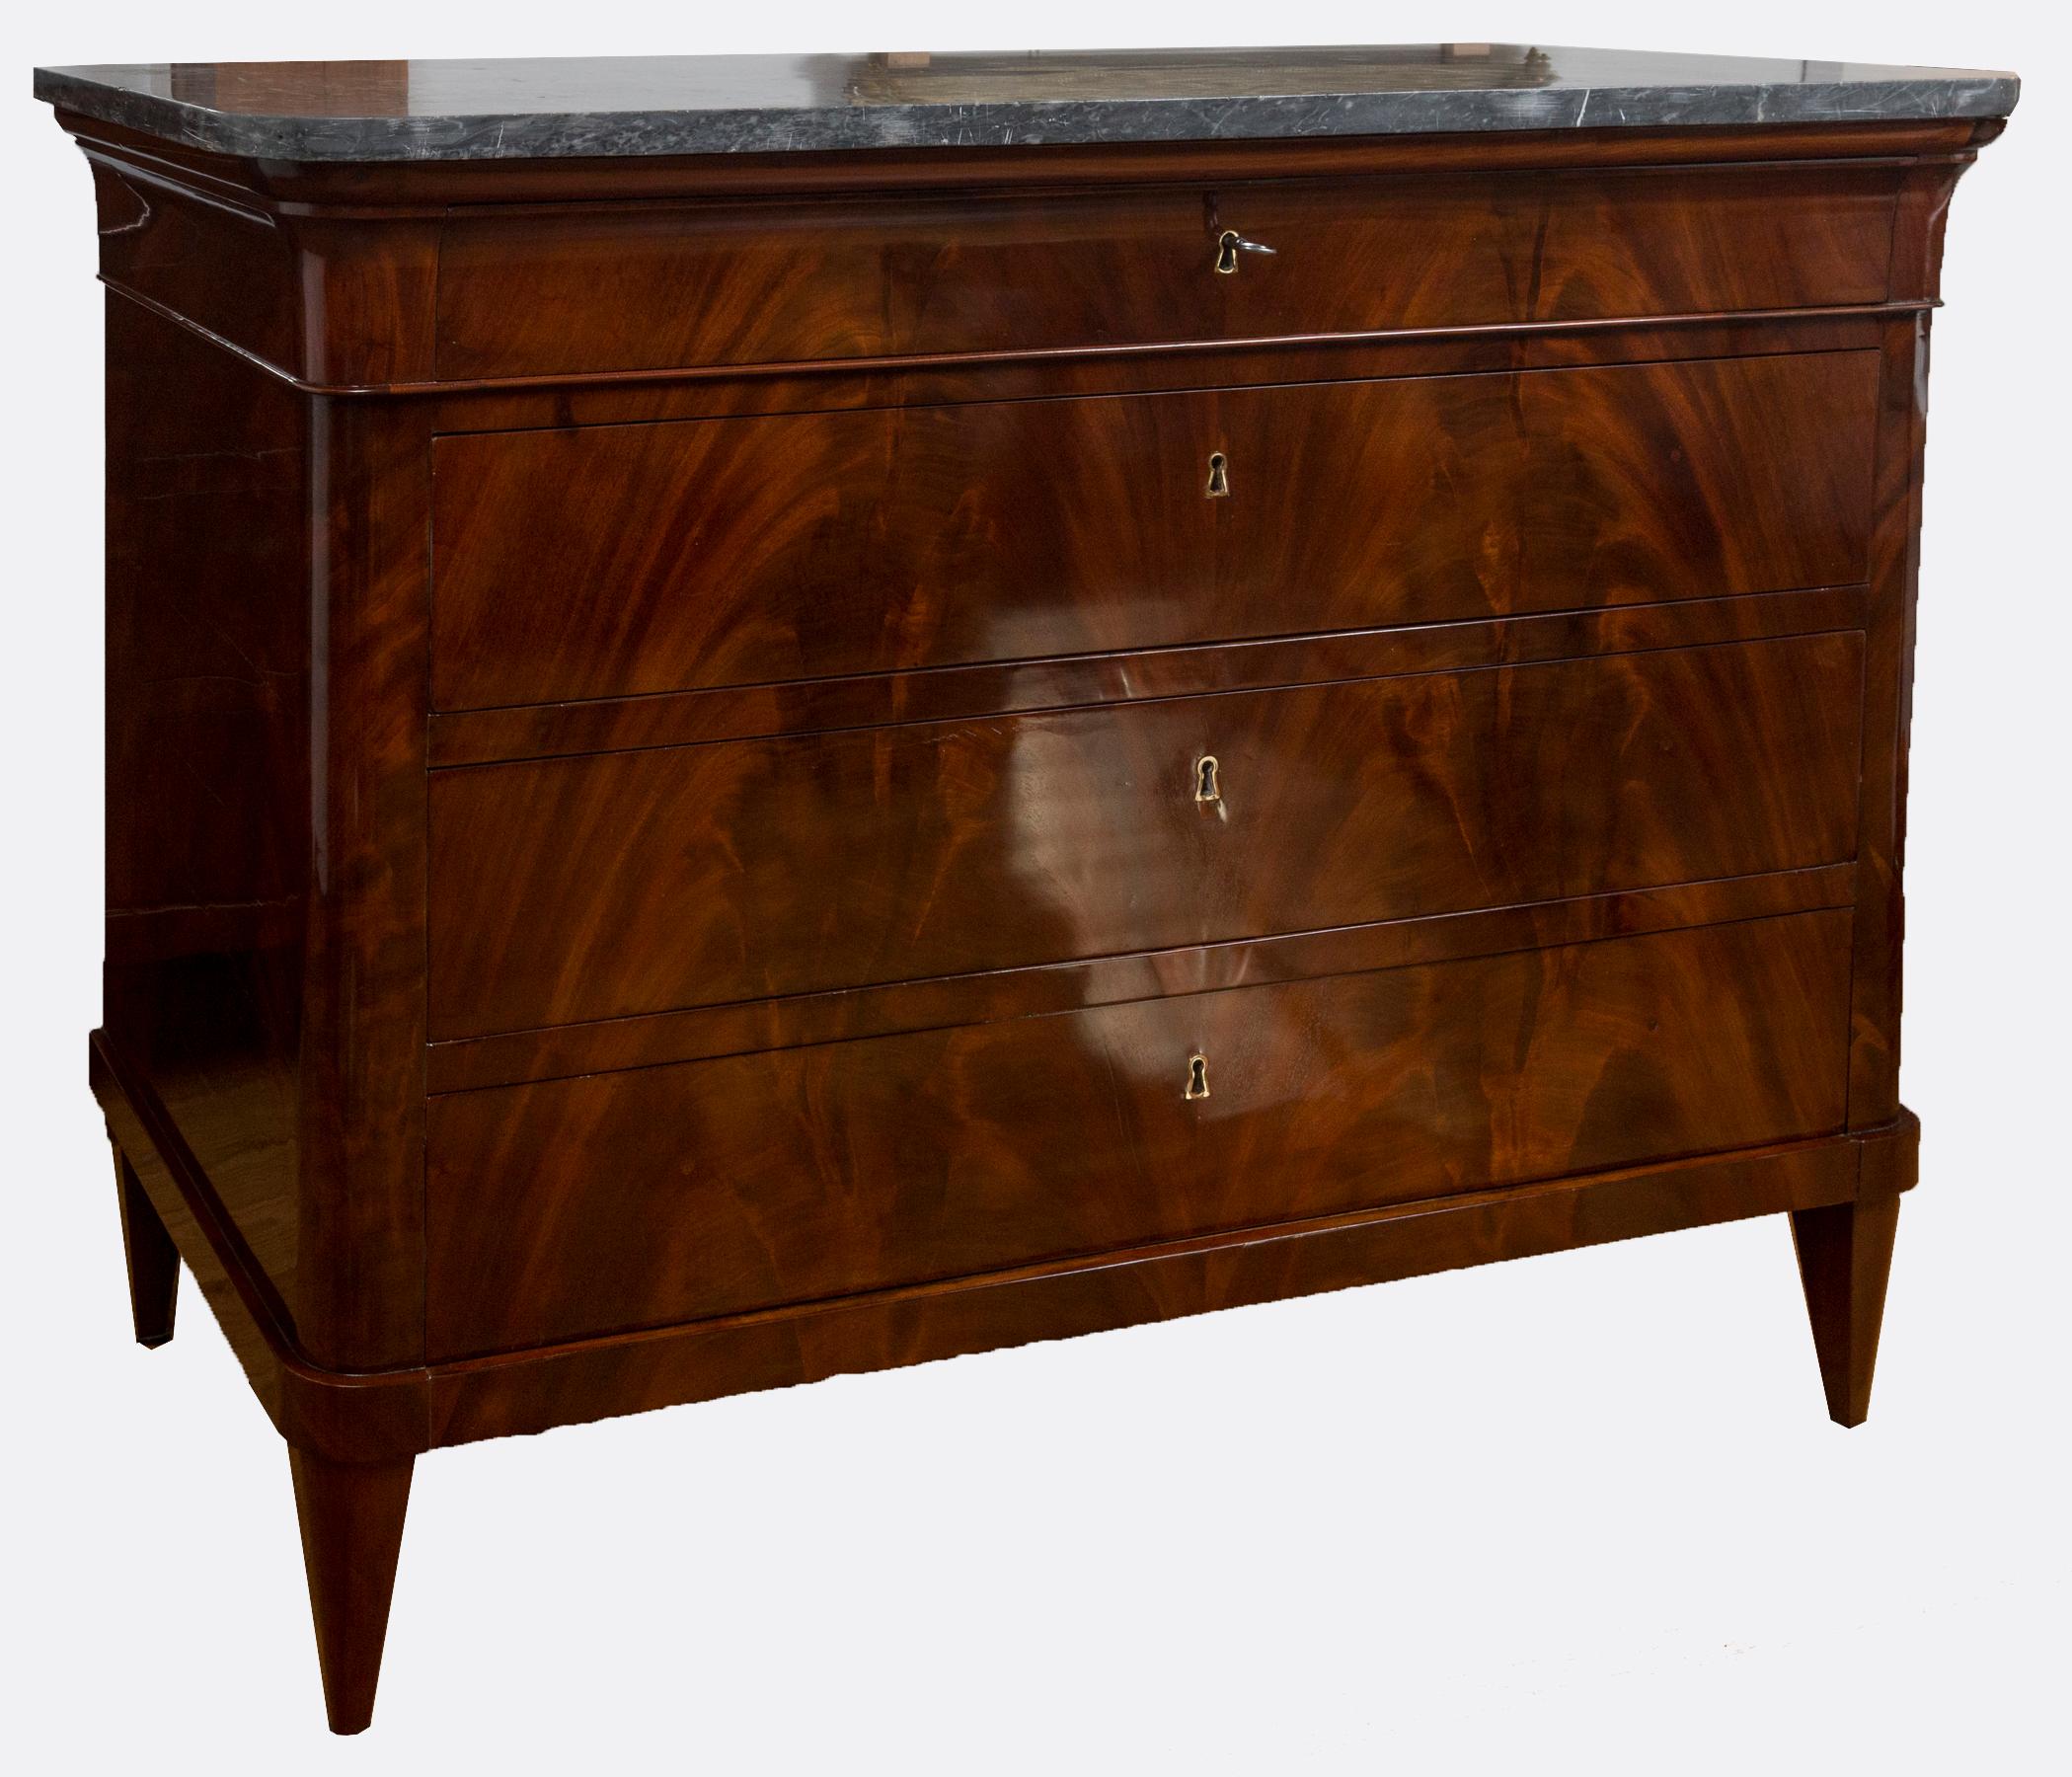 A fine pair of sleek early Empire chests shown with its orginal thickly handcut light grey marble tops above four long drawers adorned simply with a beautiful bookmatched Cuban mahogany flame veneer and finishing on tapered straight legs. Drawers